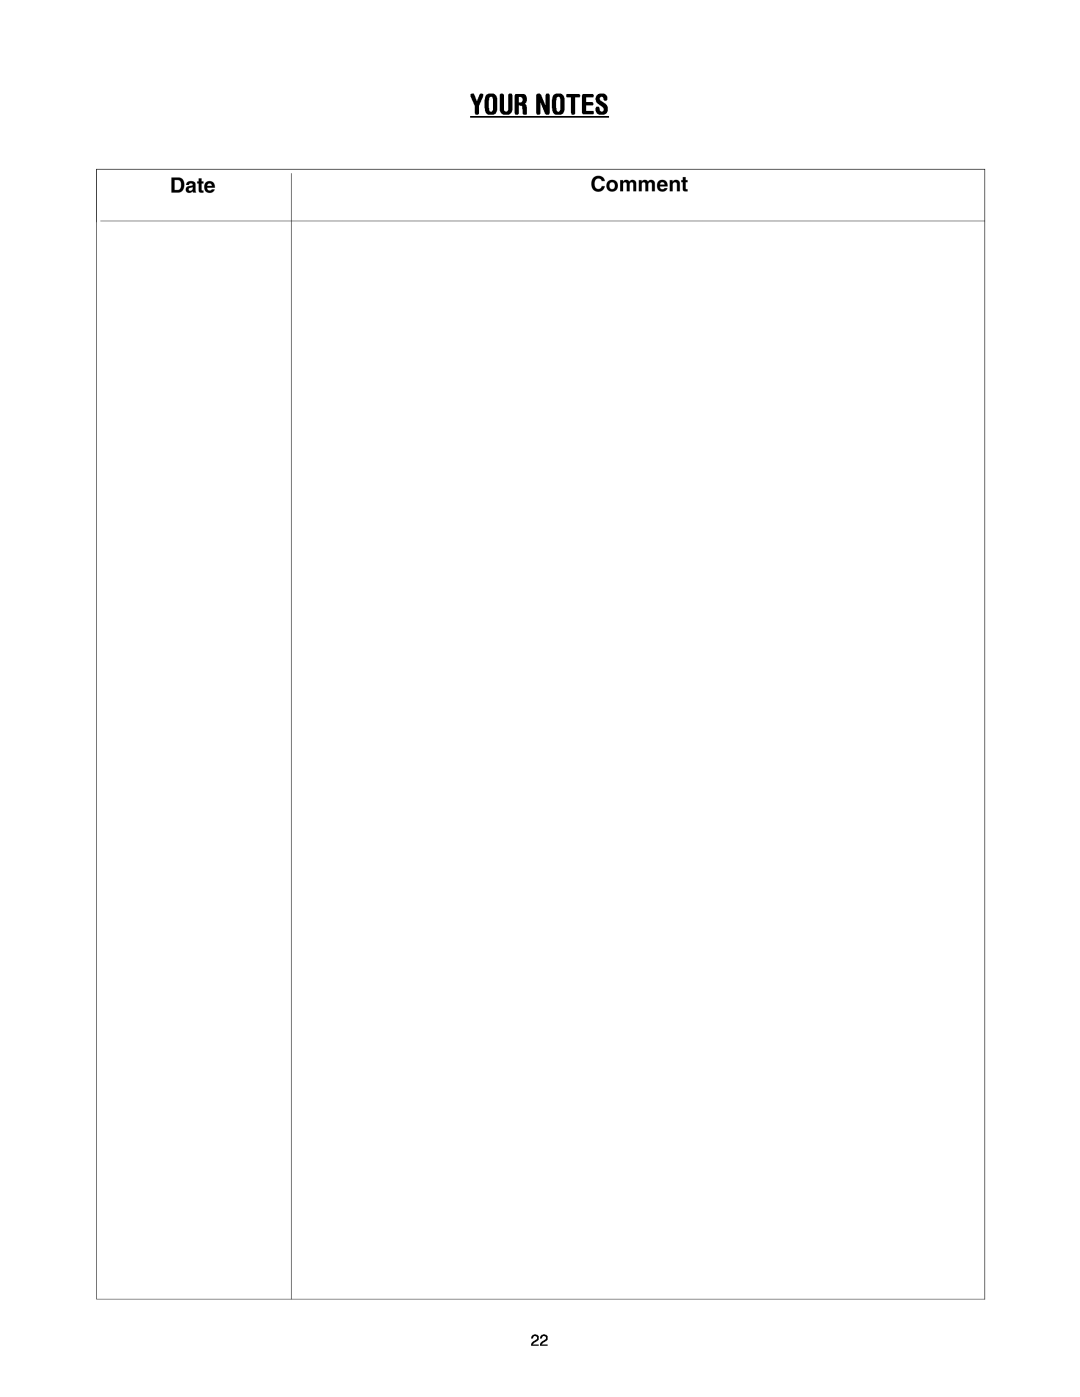 MTD 640 manual Your Notes, Date, Comment 